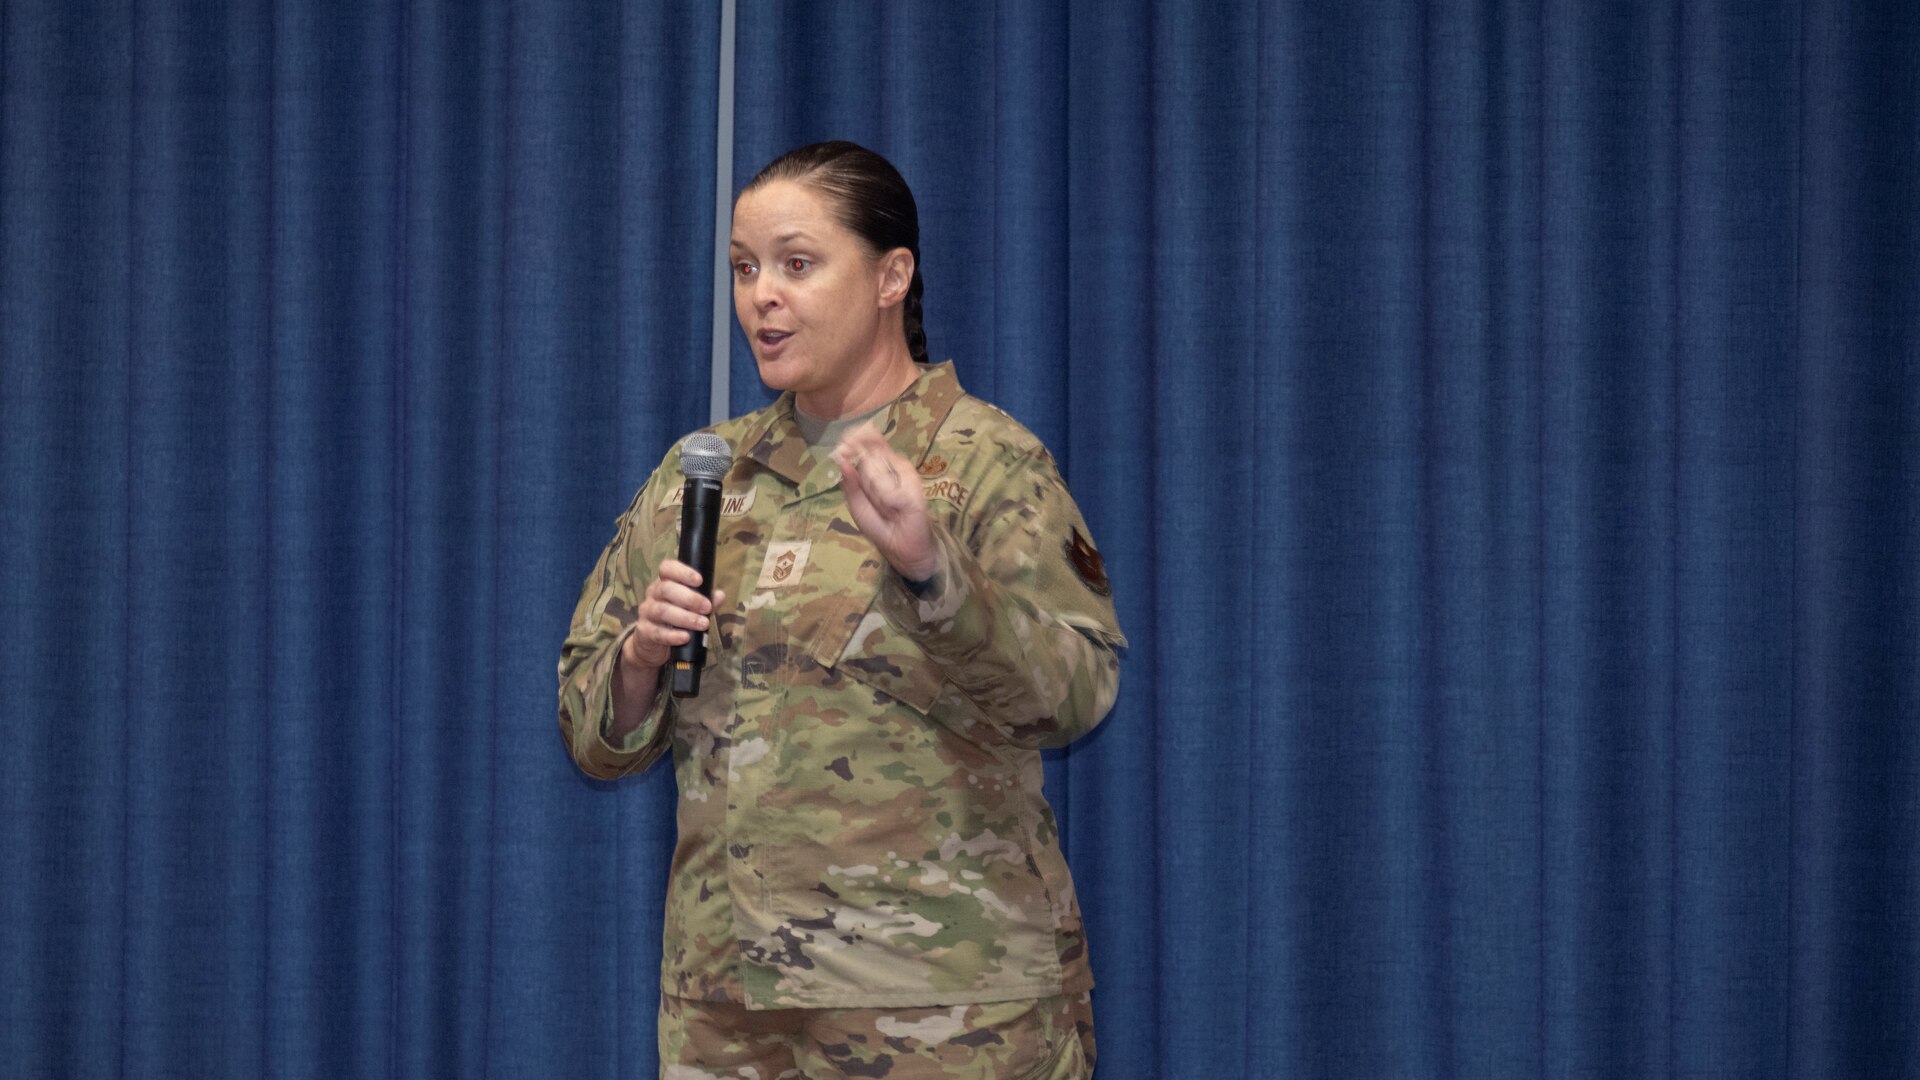 U.S. Air Force Command Chief Master Sgt. Tessa Fontaine, Special Warfare Training Wing command chief, addresses the audience at the SWTW all-call on Joint Base San Antonio-Lackland, Texas, Sept. 27, 2022. At the all-call, the SWTW command team addressed its expectations and priorities for the wing.